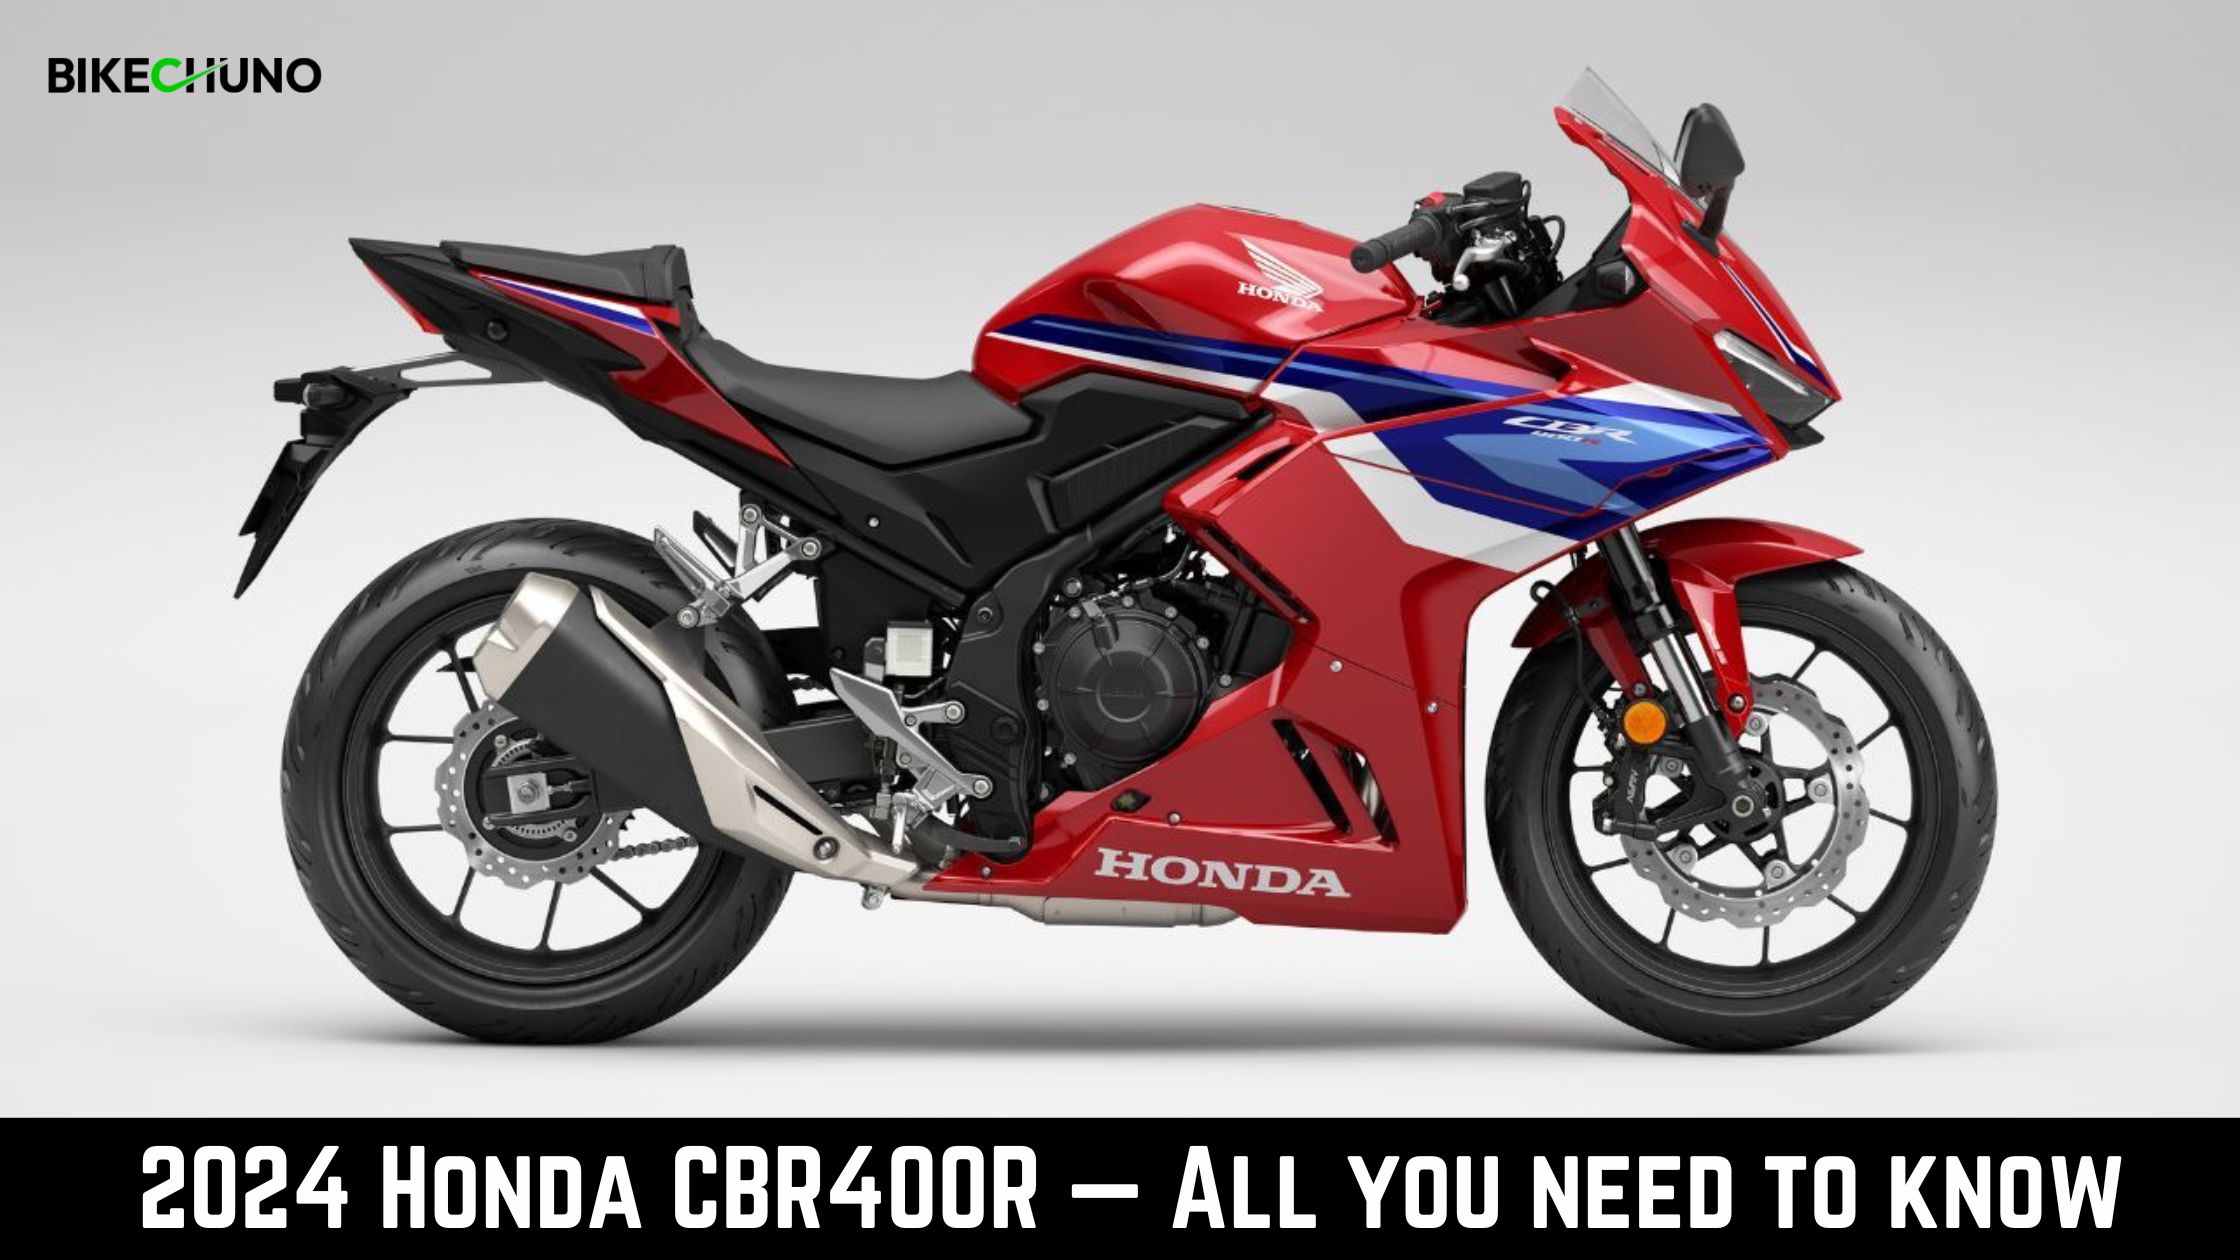 2024 Honda CBR400R — All you need to know